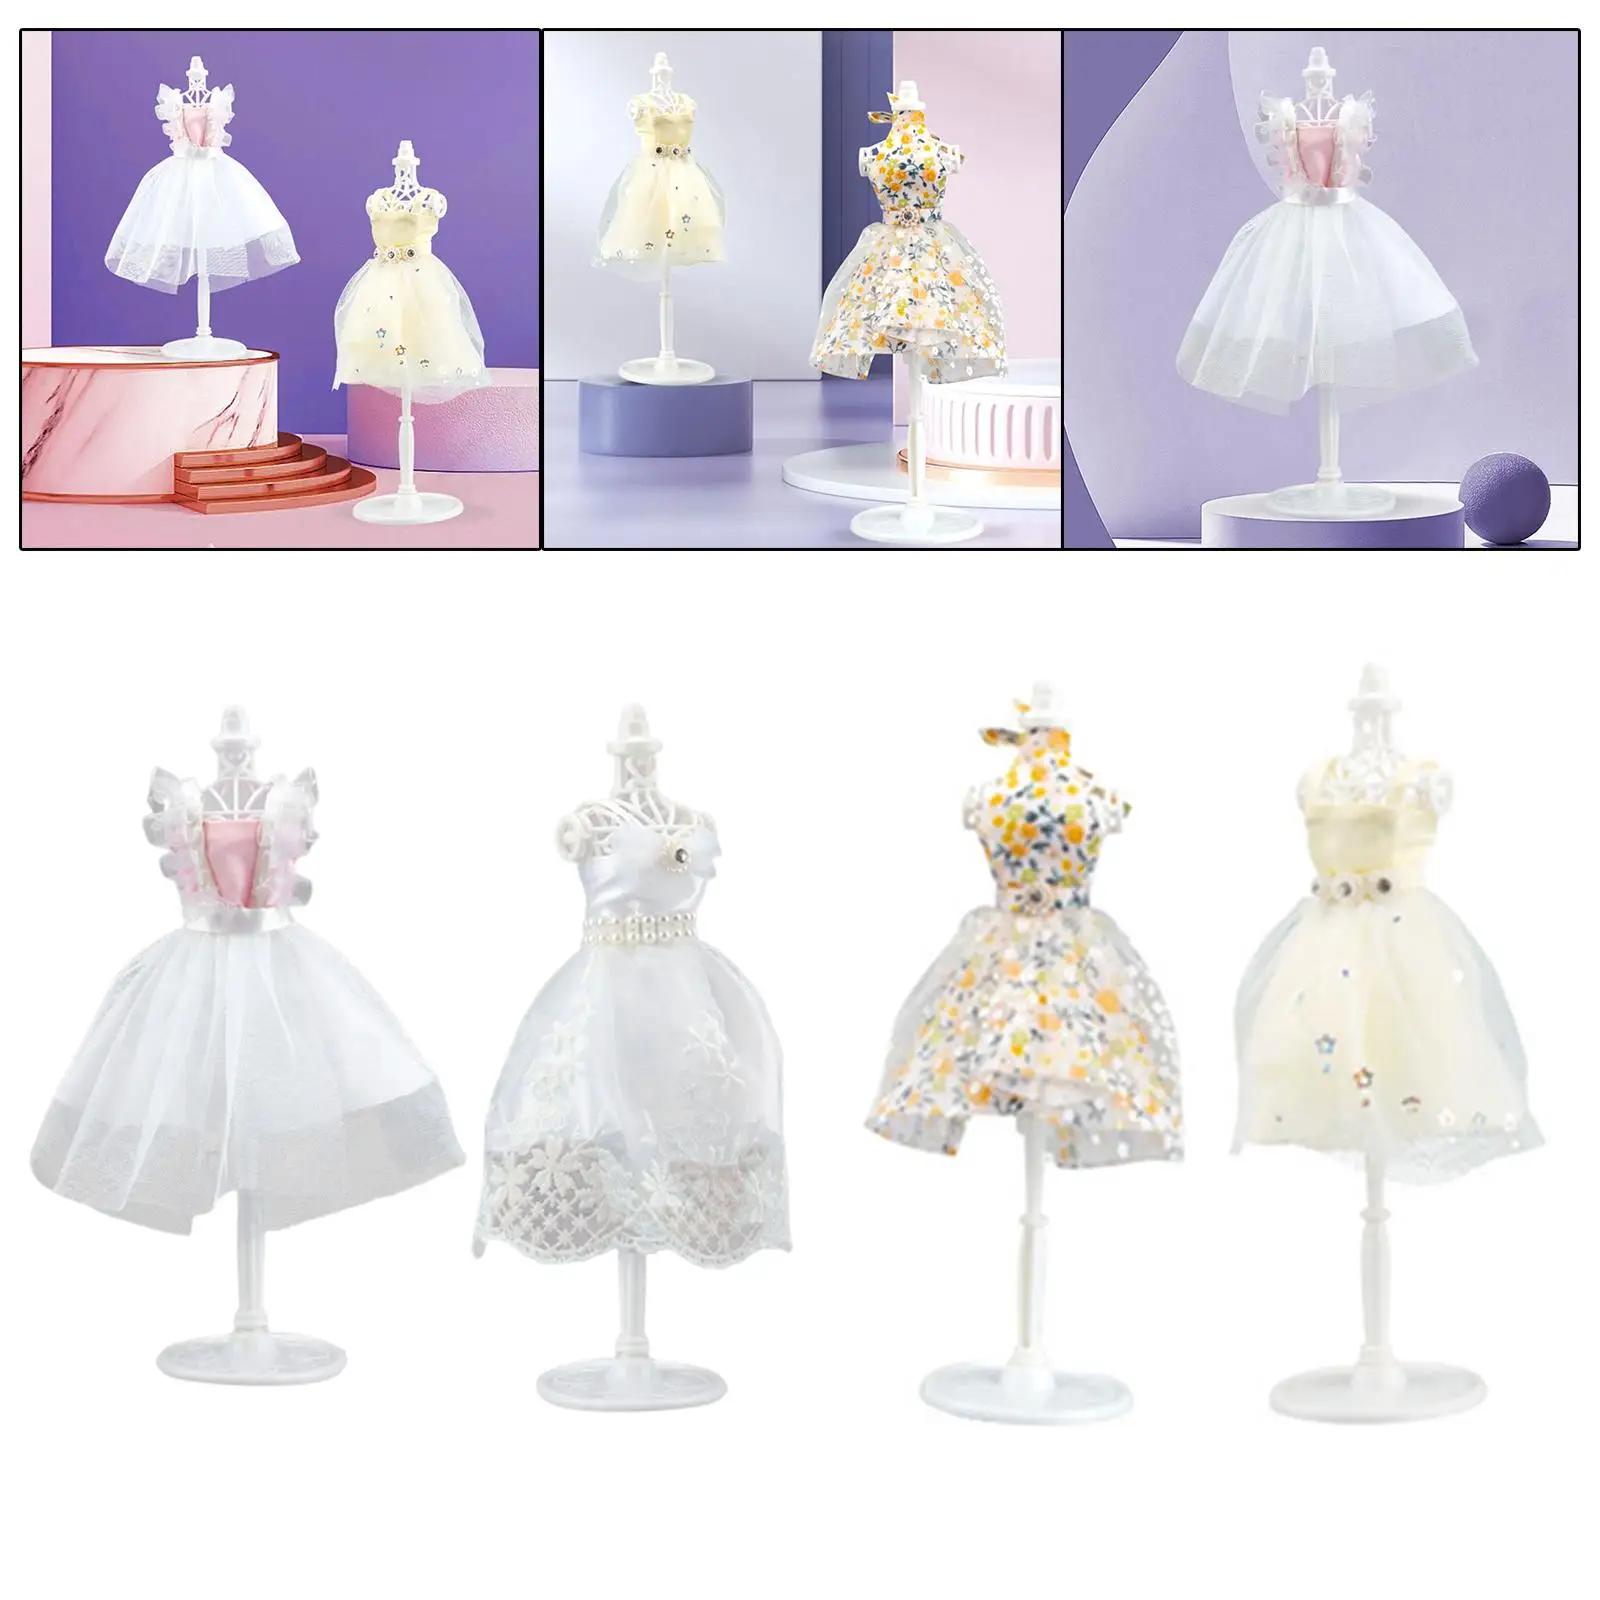 Fashion Design Kit Princess Doll Clothes Making diy for Party Beginner